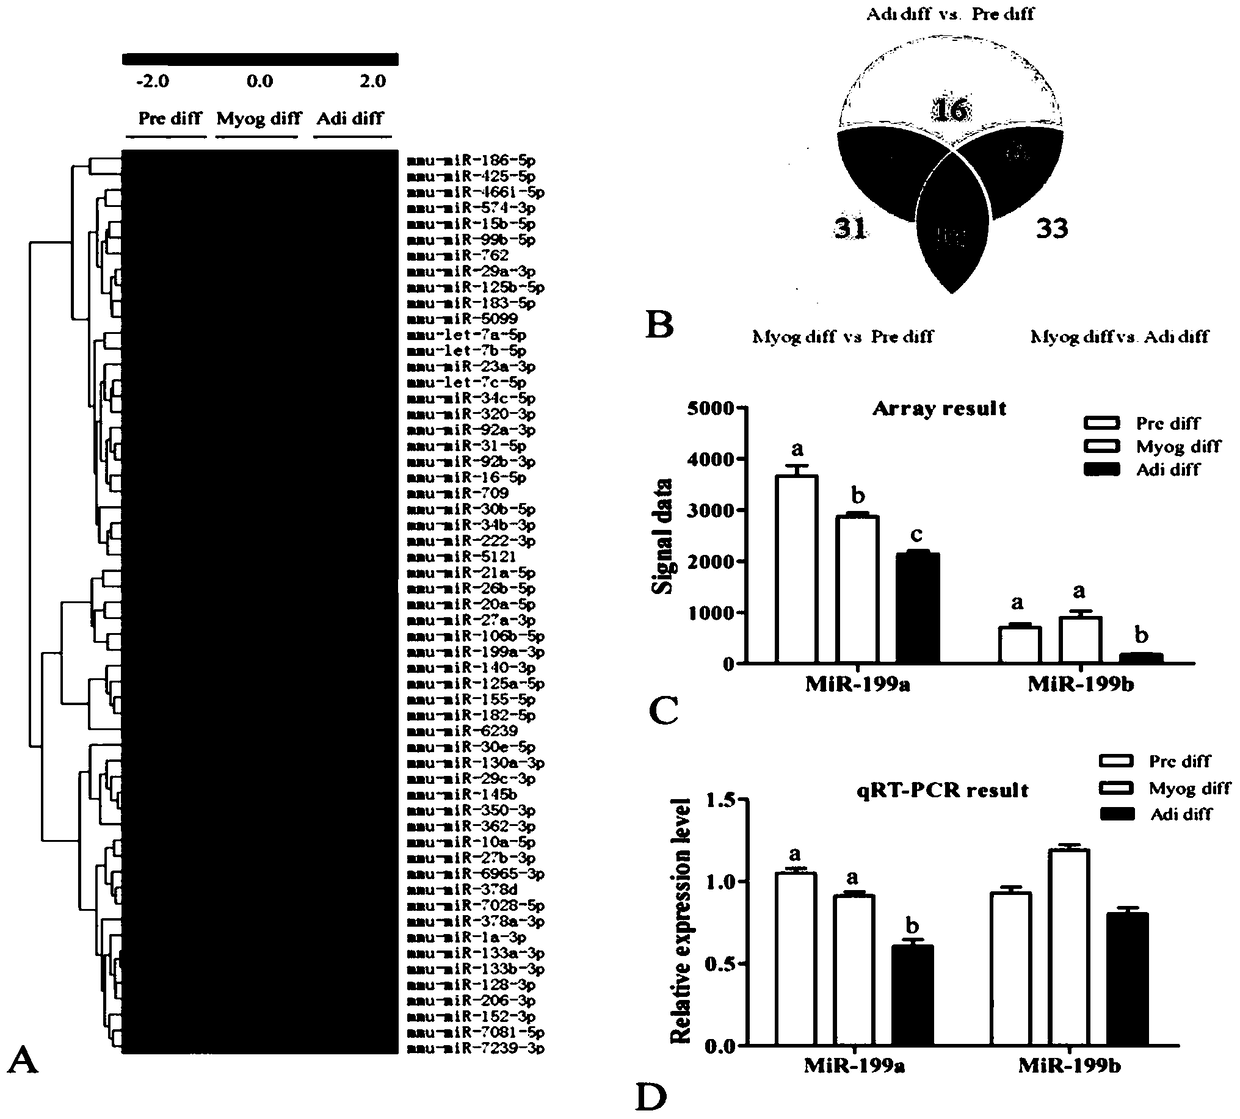 Use of miRNA-199a as an agent to inhibit adipogenic differentiation of myoblasts